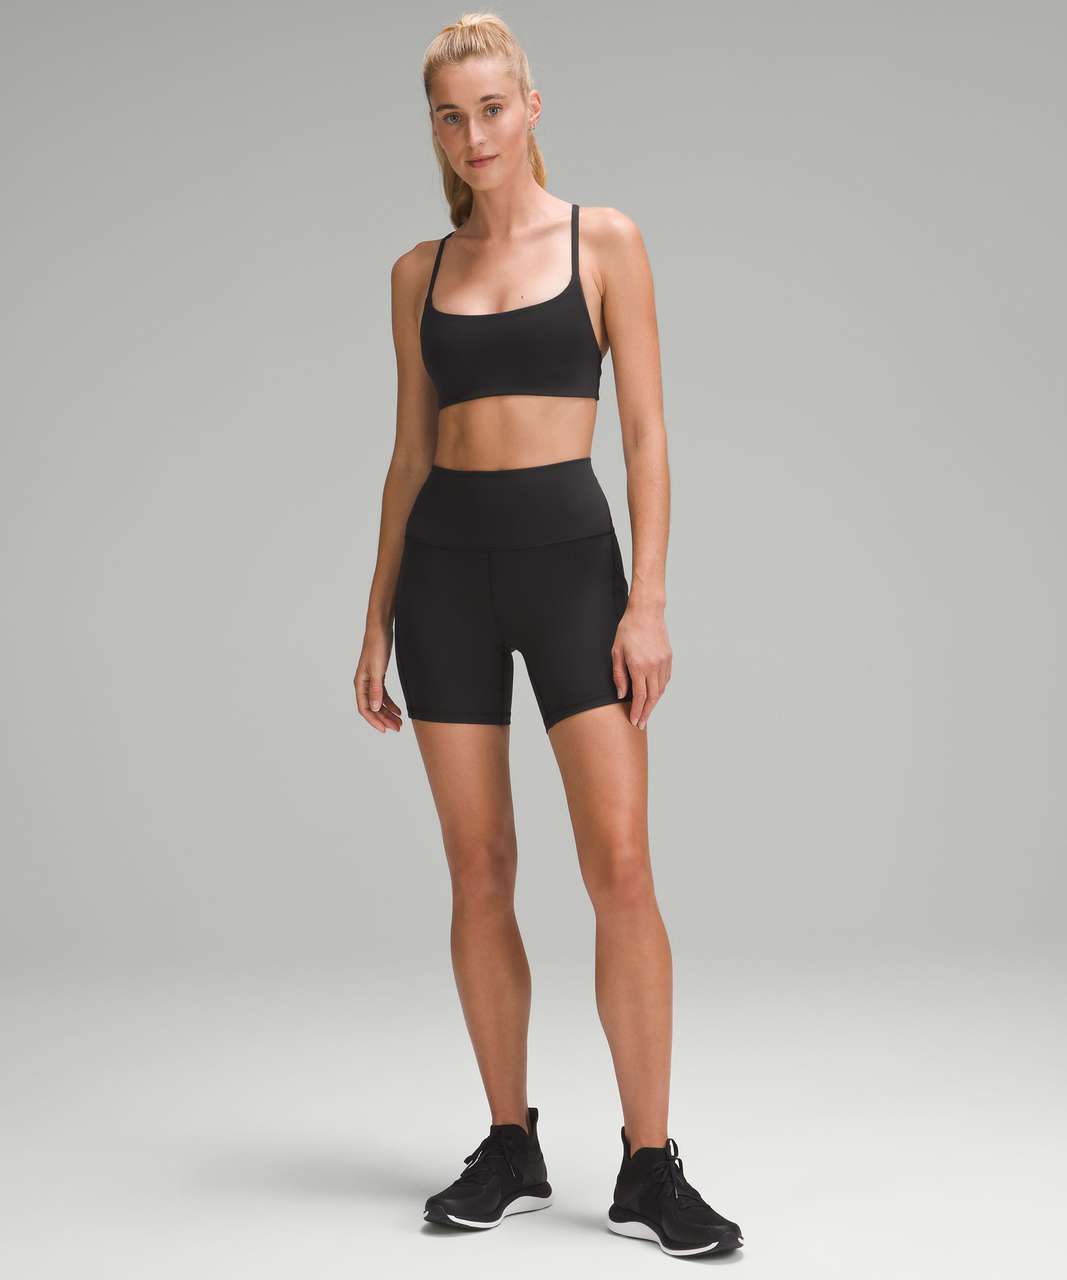 Lululemon Wunder Train Strappy Racer Bra *Light Support, A/B Cup - Black (Fourth Release)